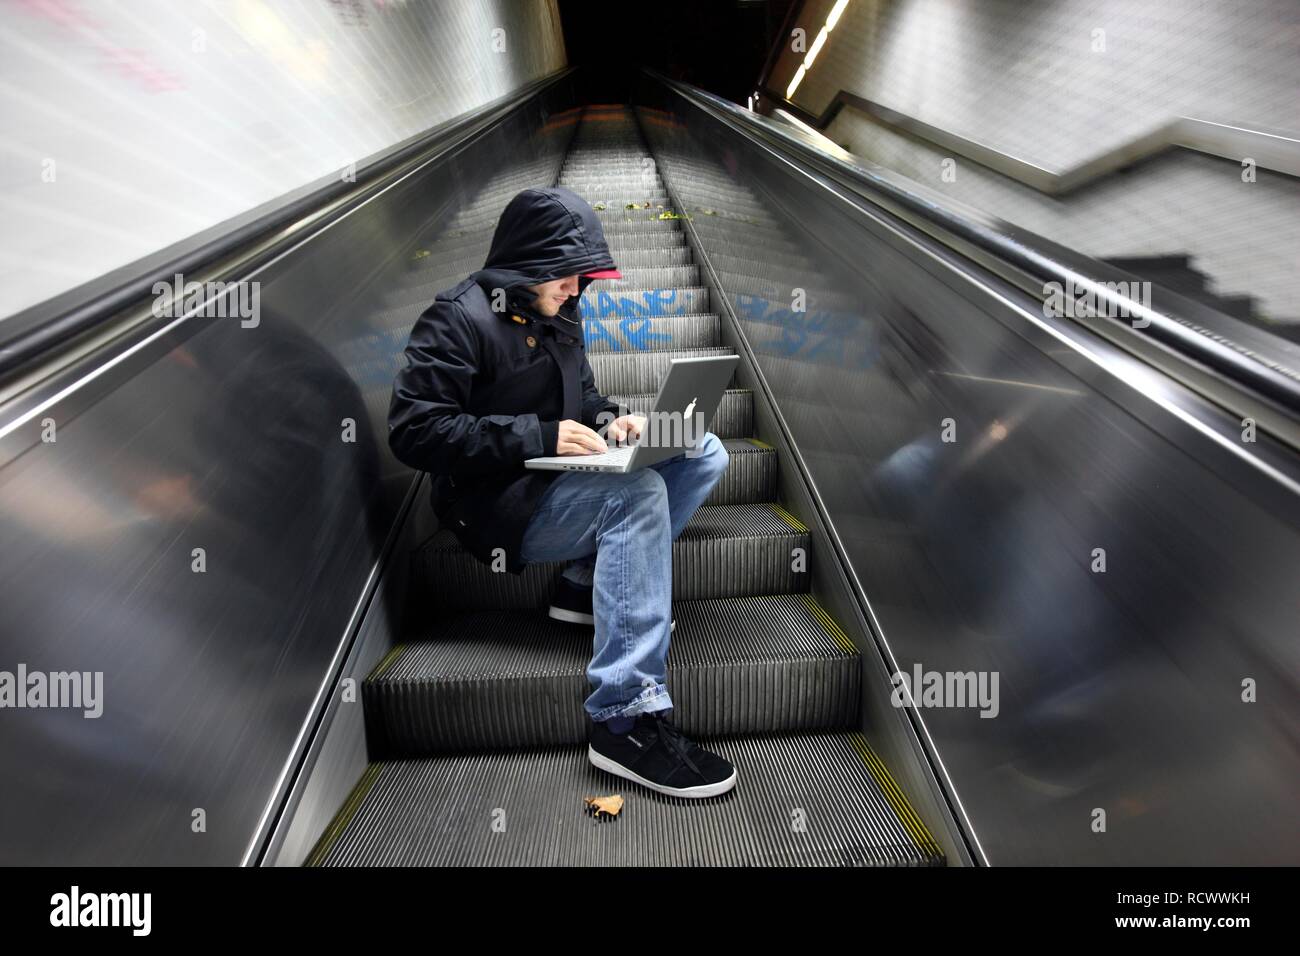 Hacker working on a laptop computer on an escalator in a subway passage at night, symbolic image for computer hacking Stock Photo